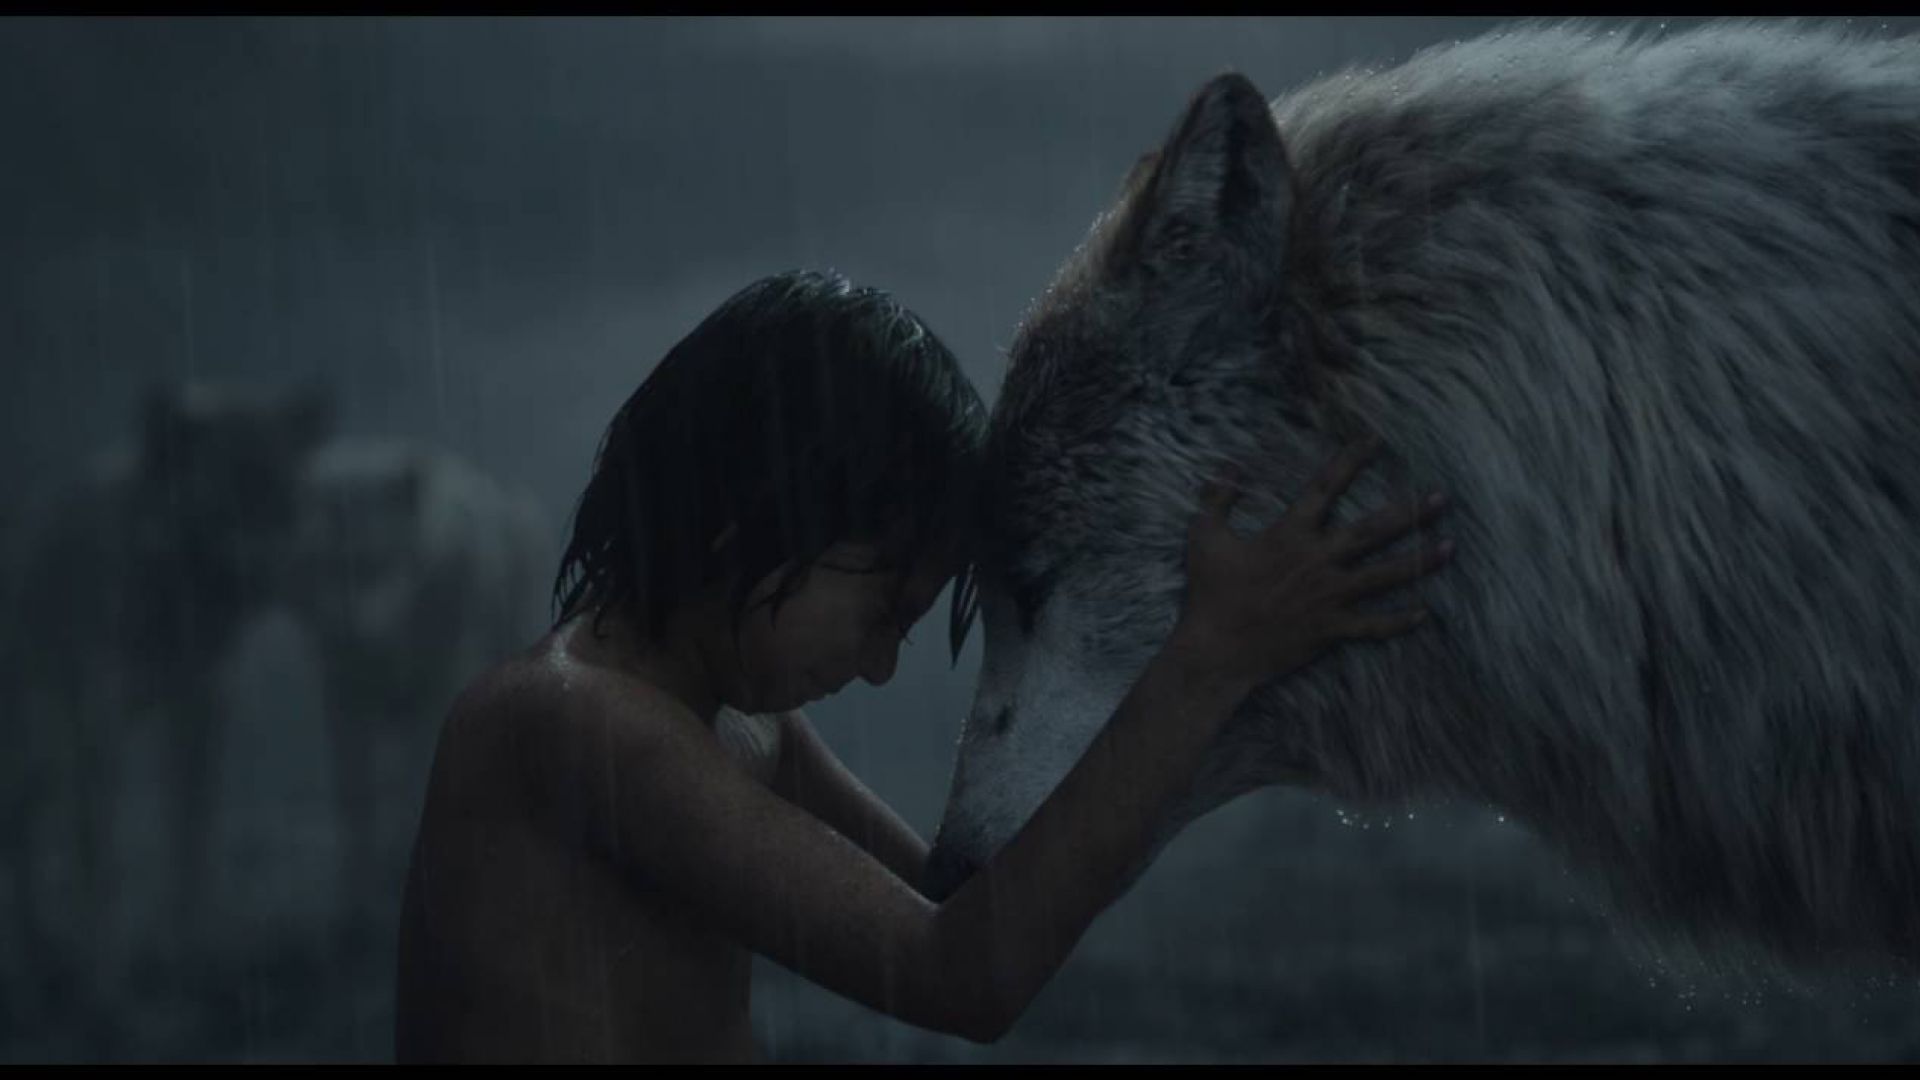 Trailer: The Jungle Book On Digital Aug 3 And On Blu-ray Aug